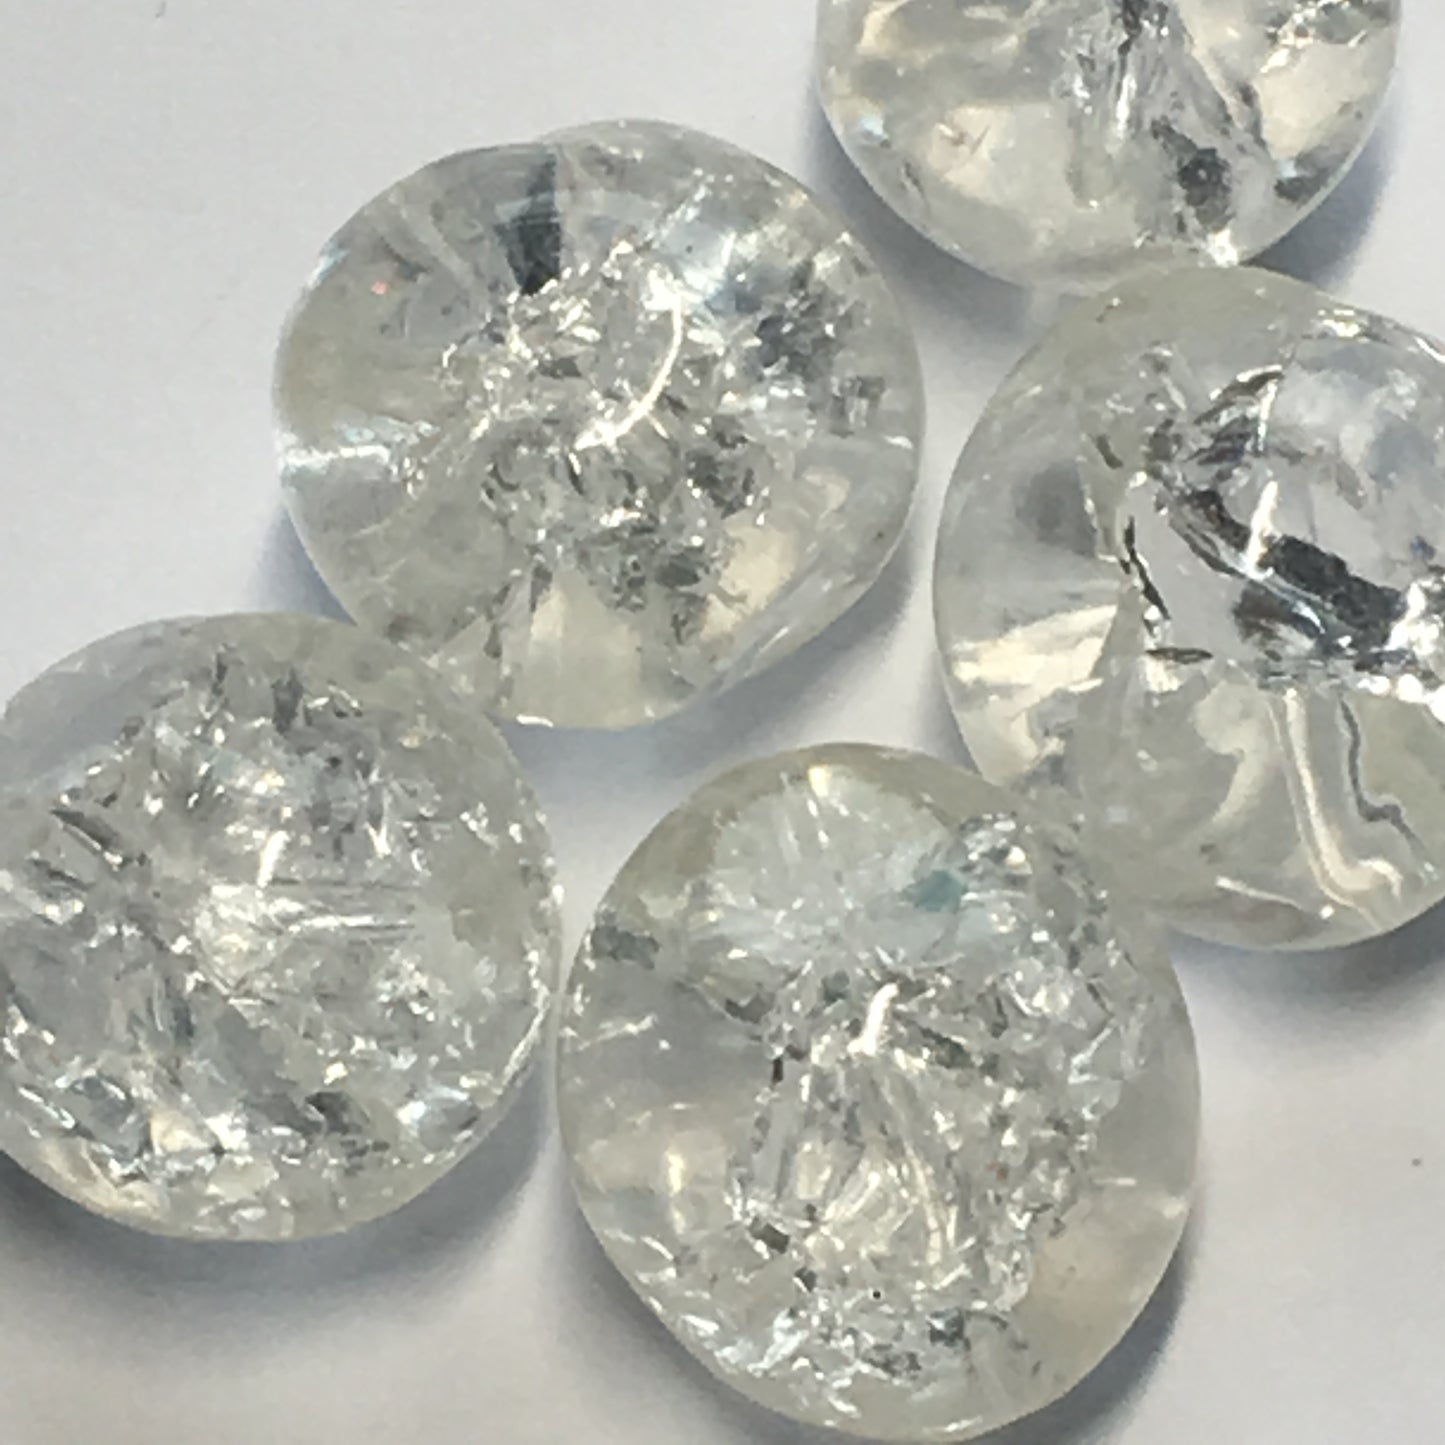 Clear Crackle Glass Faceted Round Beads, 15 mm - 11 Beads